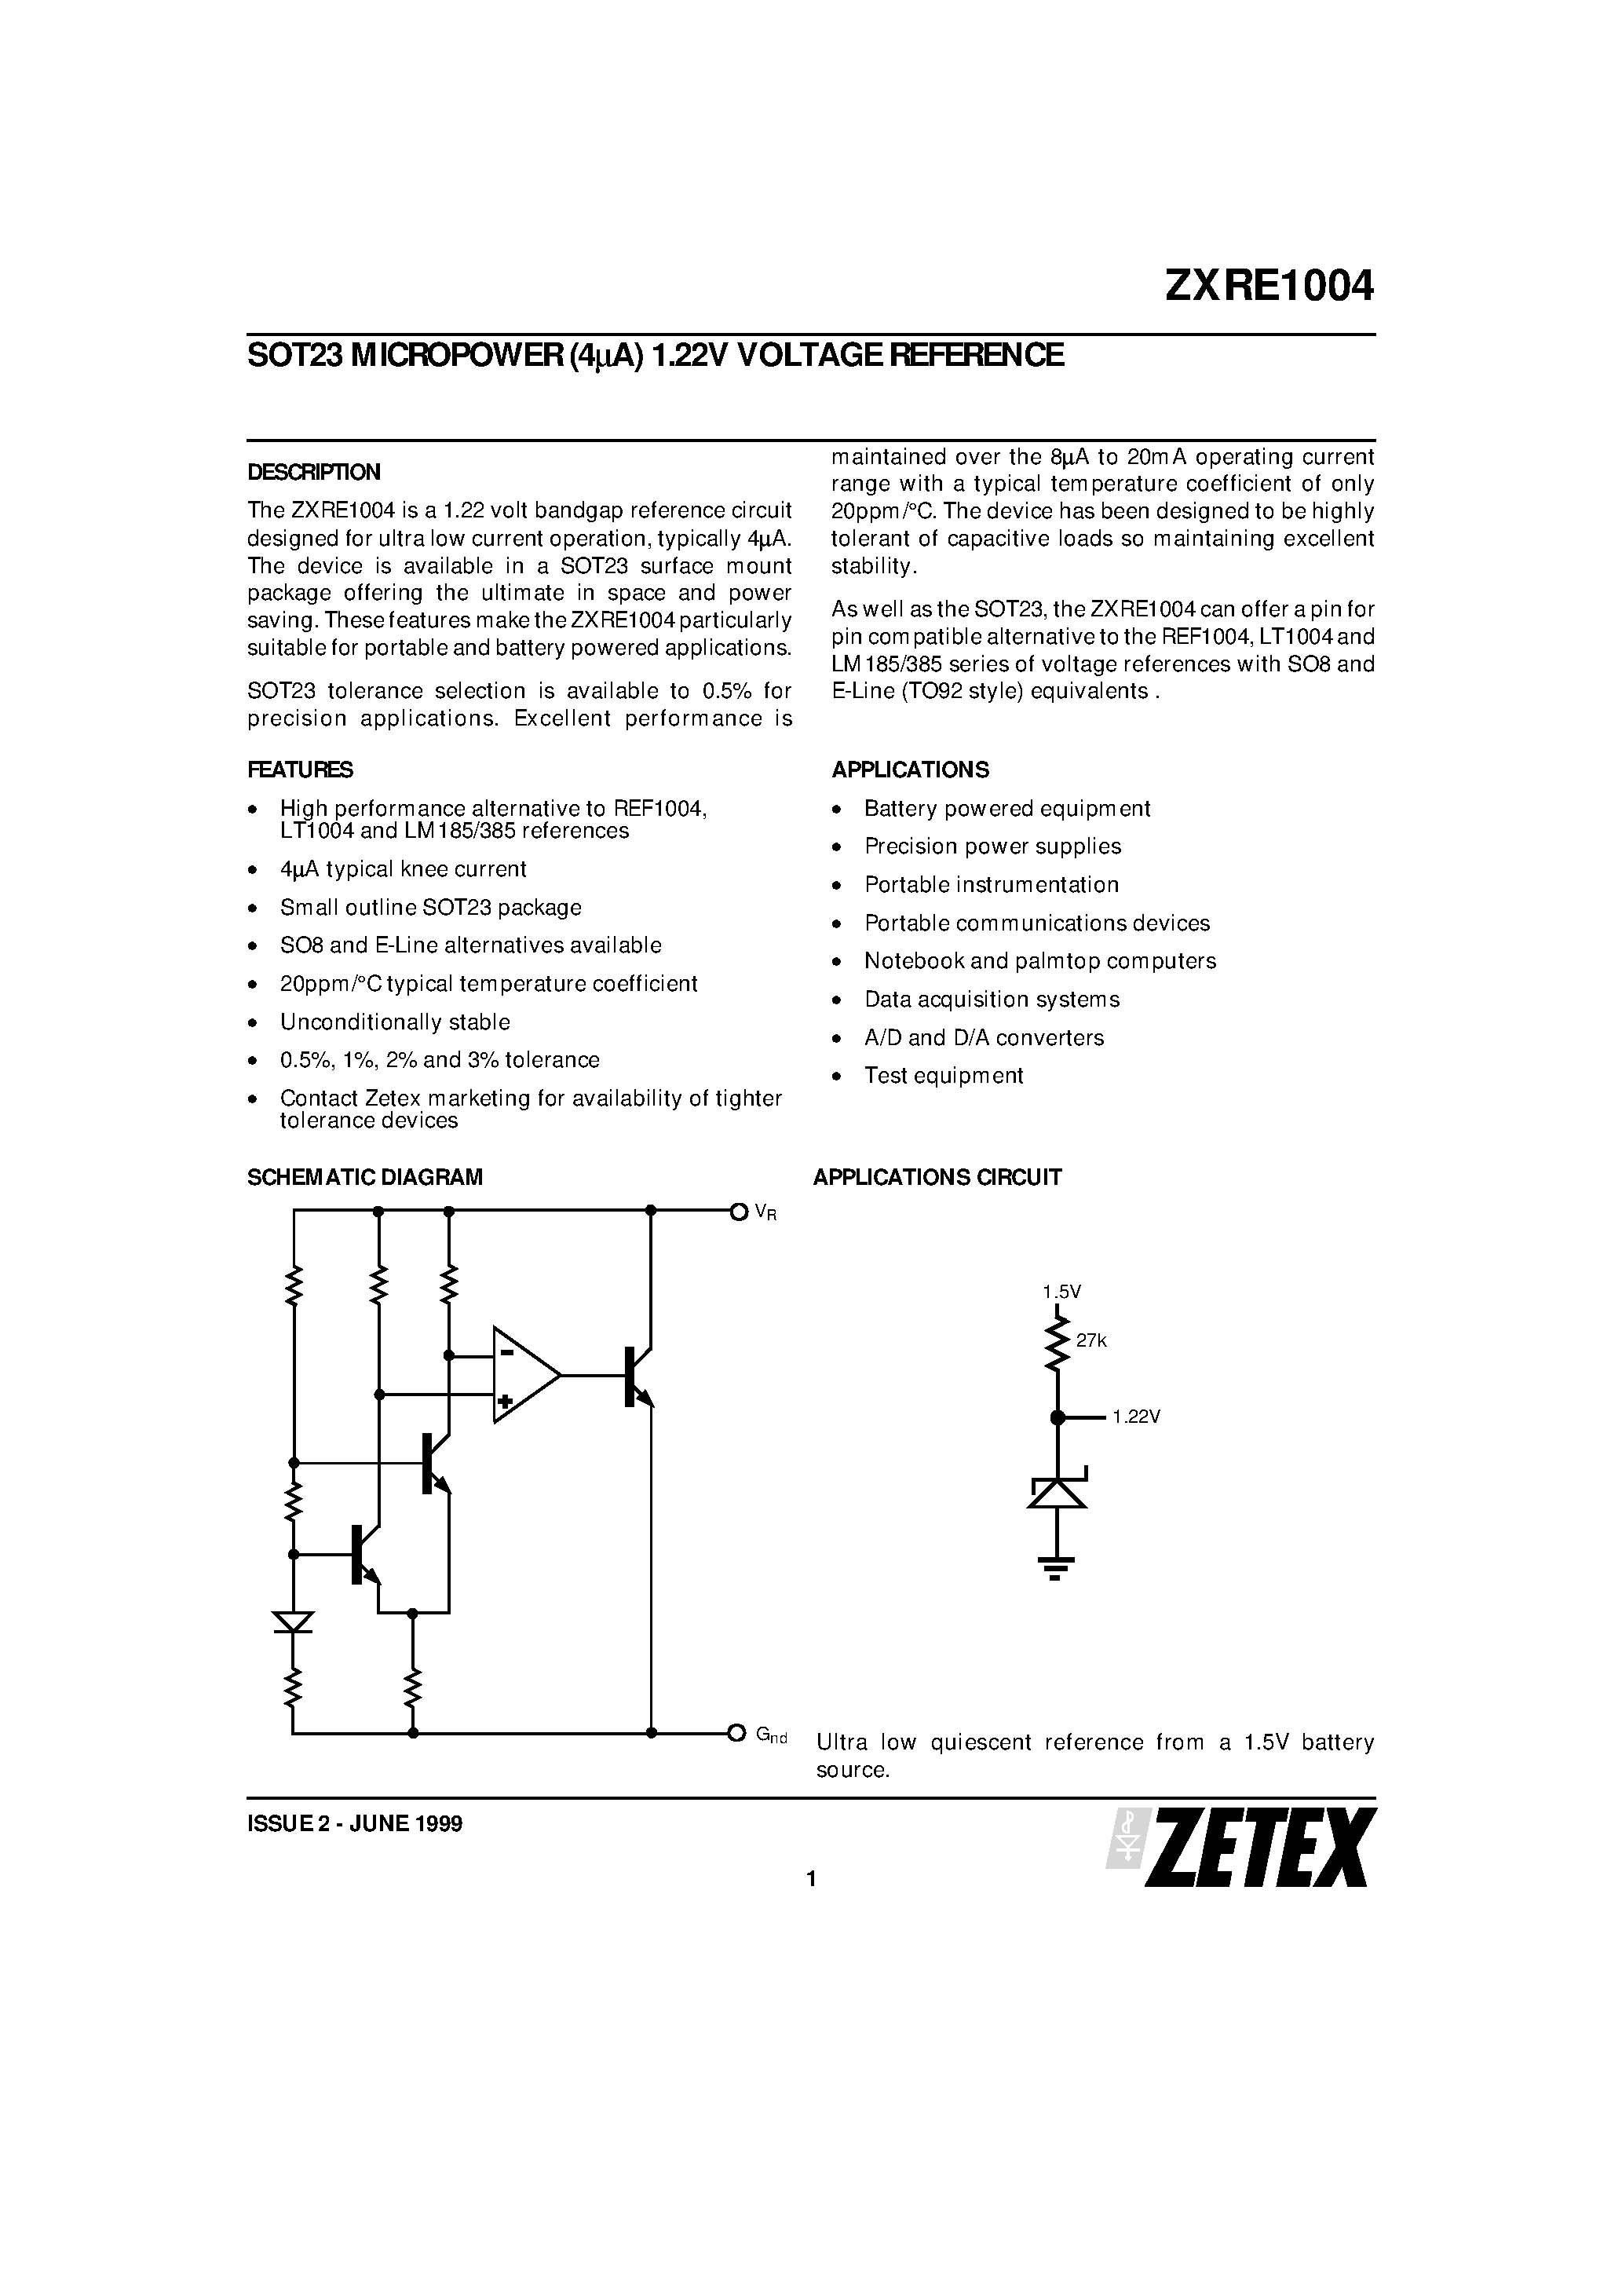 Datasheet ZXRE1004 - SOT23 MICROPOWER (4uA) 1.22V VOLTAGE REFERENCE page 1